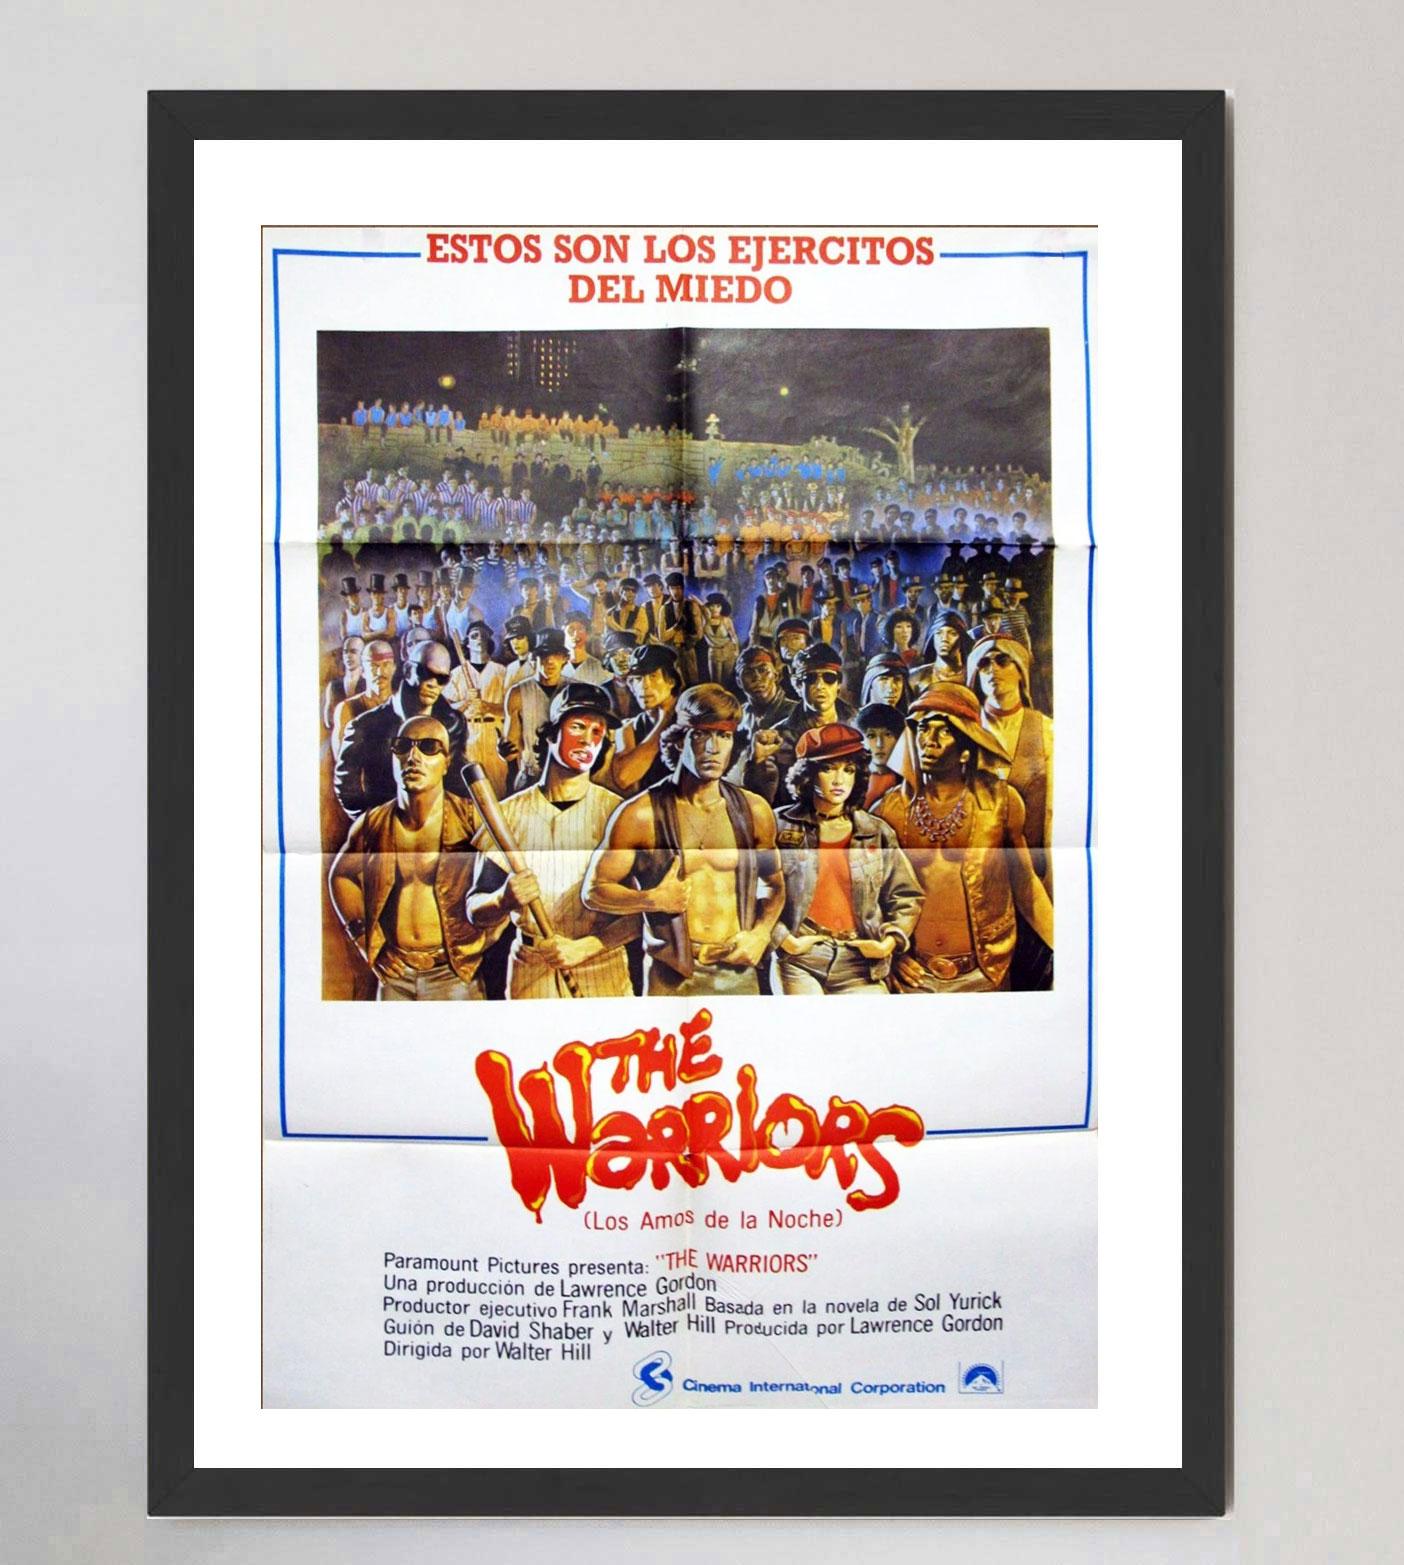 Based on Sol Yurick's 1965 novel, Walter Hill's 1979 film The Warriors is a celebrated cult classic from 1979. Depicting gang warfare, violence and vandalism, the distributors actually halted advertising the film upon release, and the initial